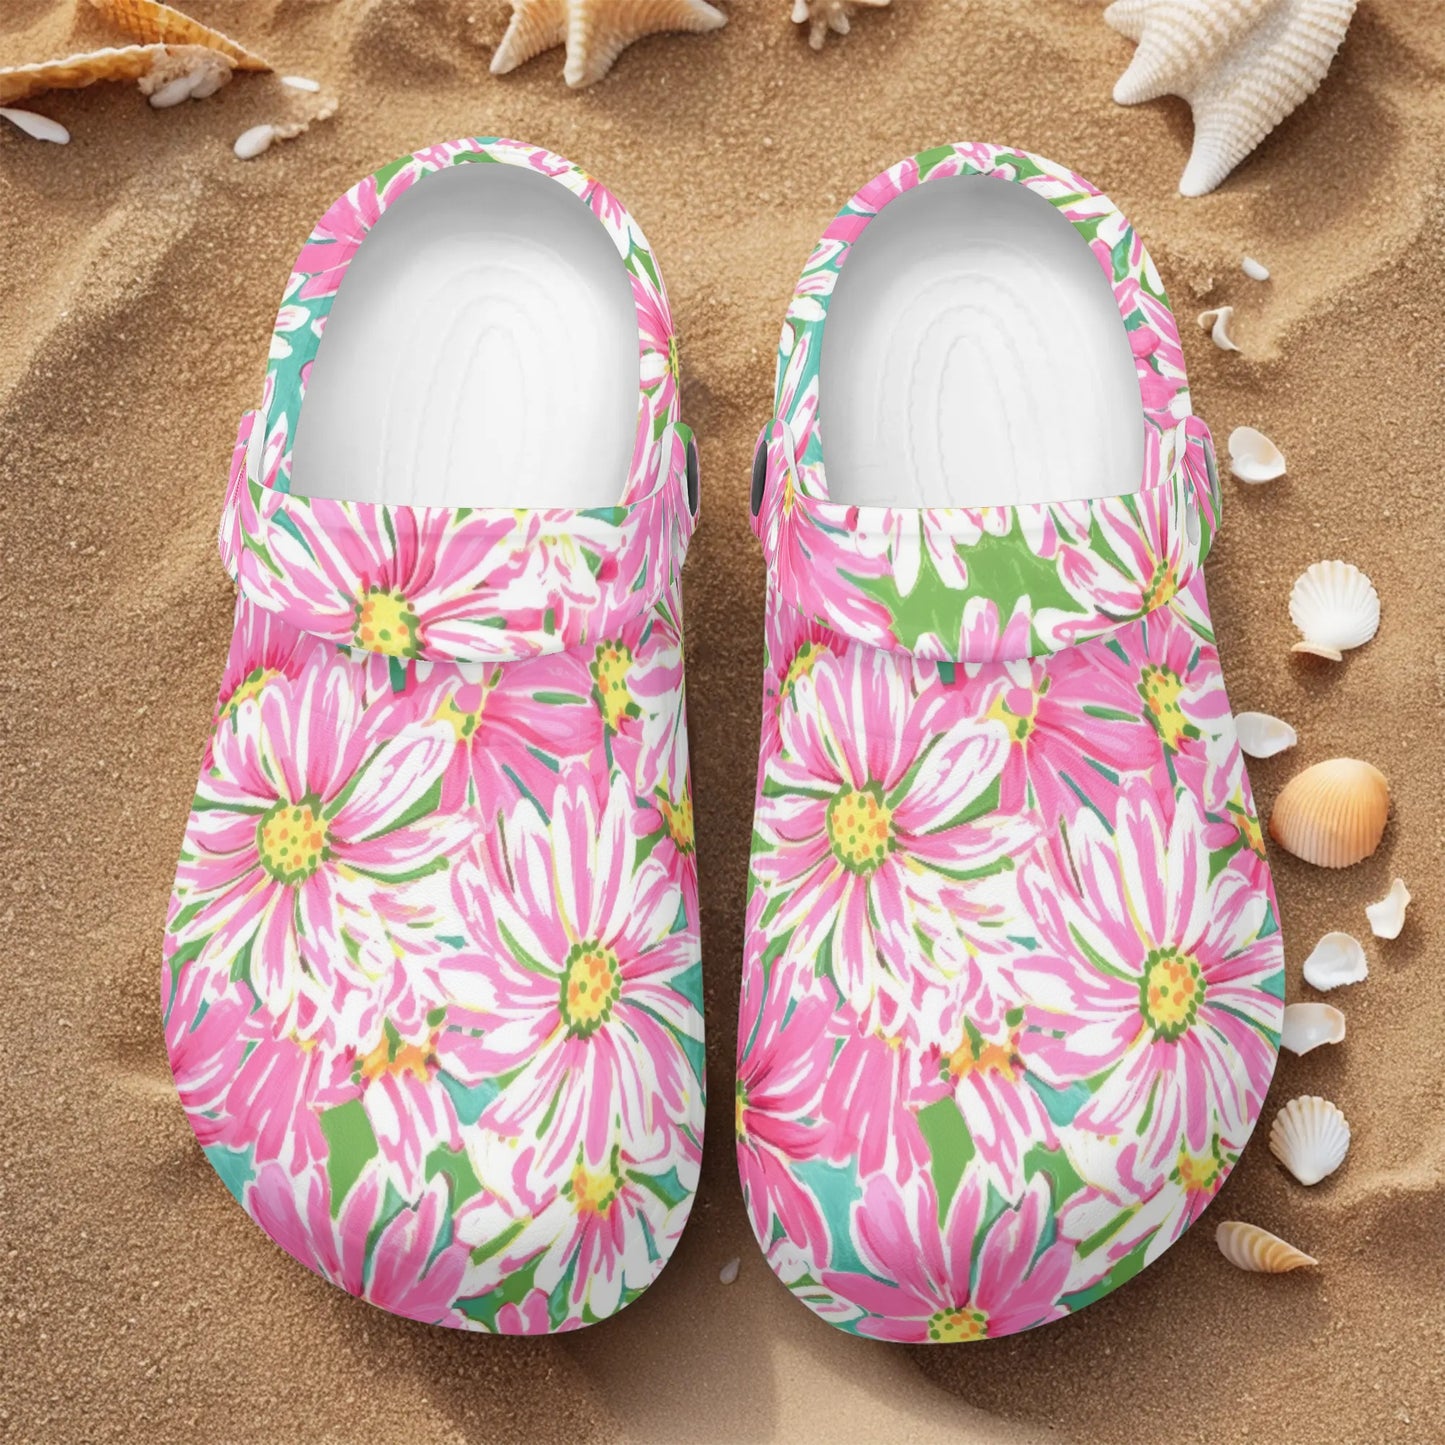 Springs Whisper: Watercolor Pink Daisies Dancing on a Lush Green Stage Casual Lightweight Slip On Nurse Style Clogs